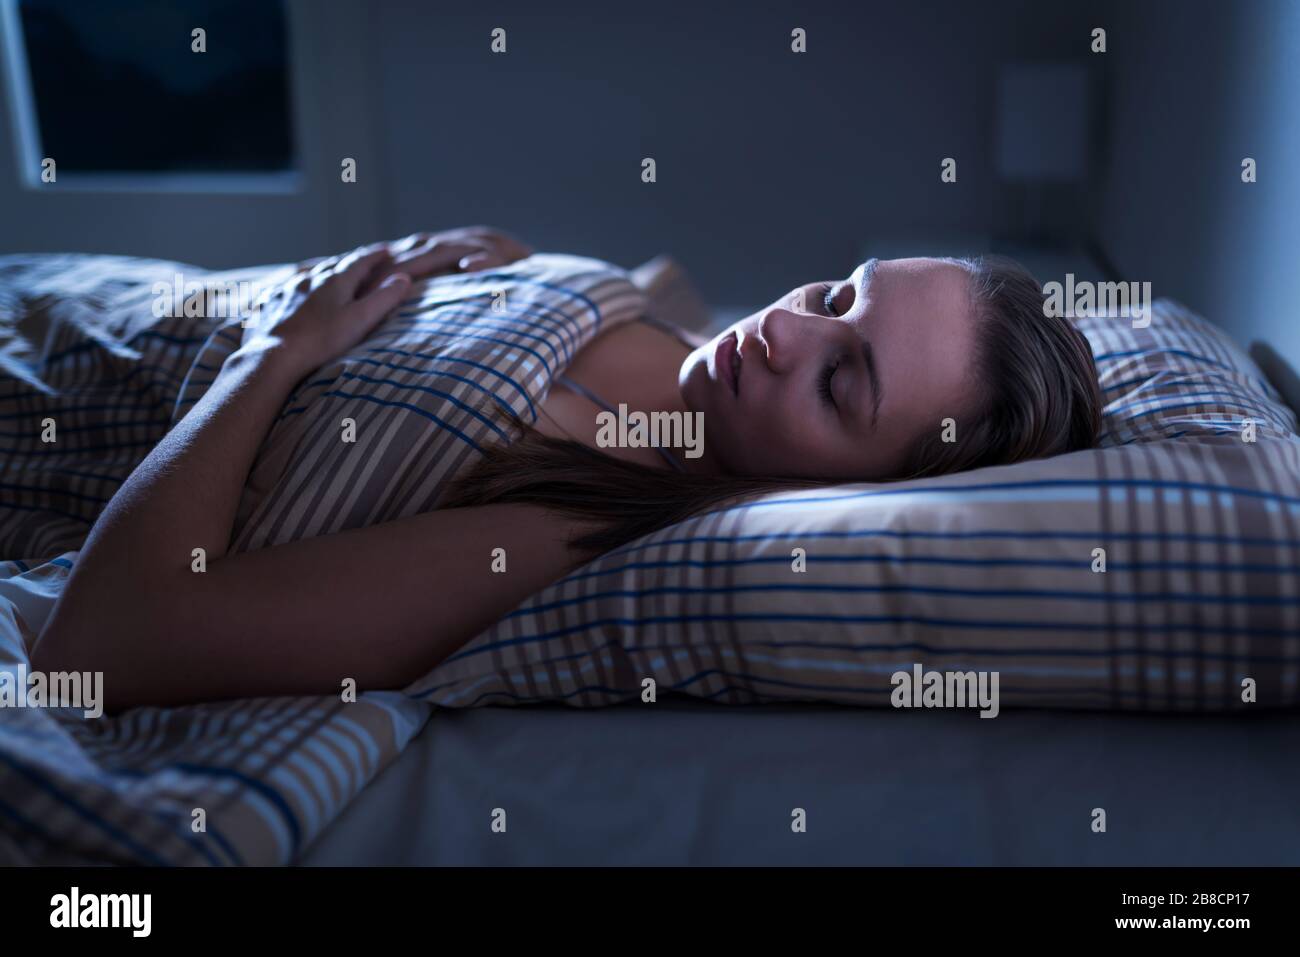 Calm and peaceful woman sleeping in bed in dark bedroom. Lady asleep at home in the middle of the night. Pillow, blanket and moonlight. Stock Photo